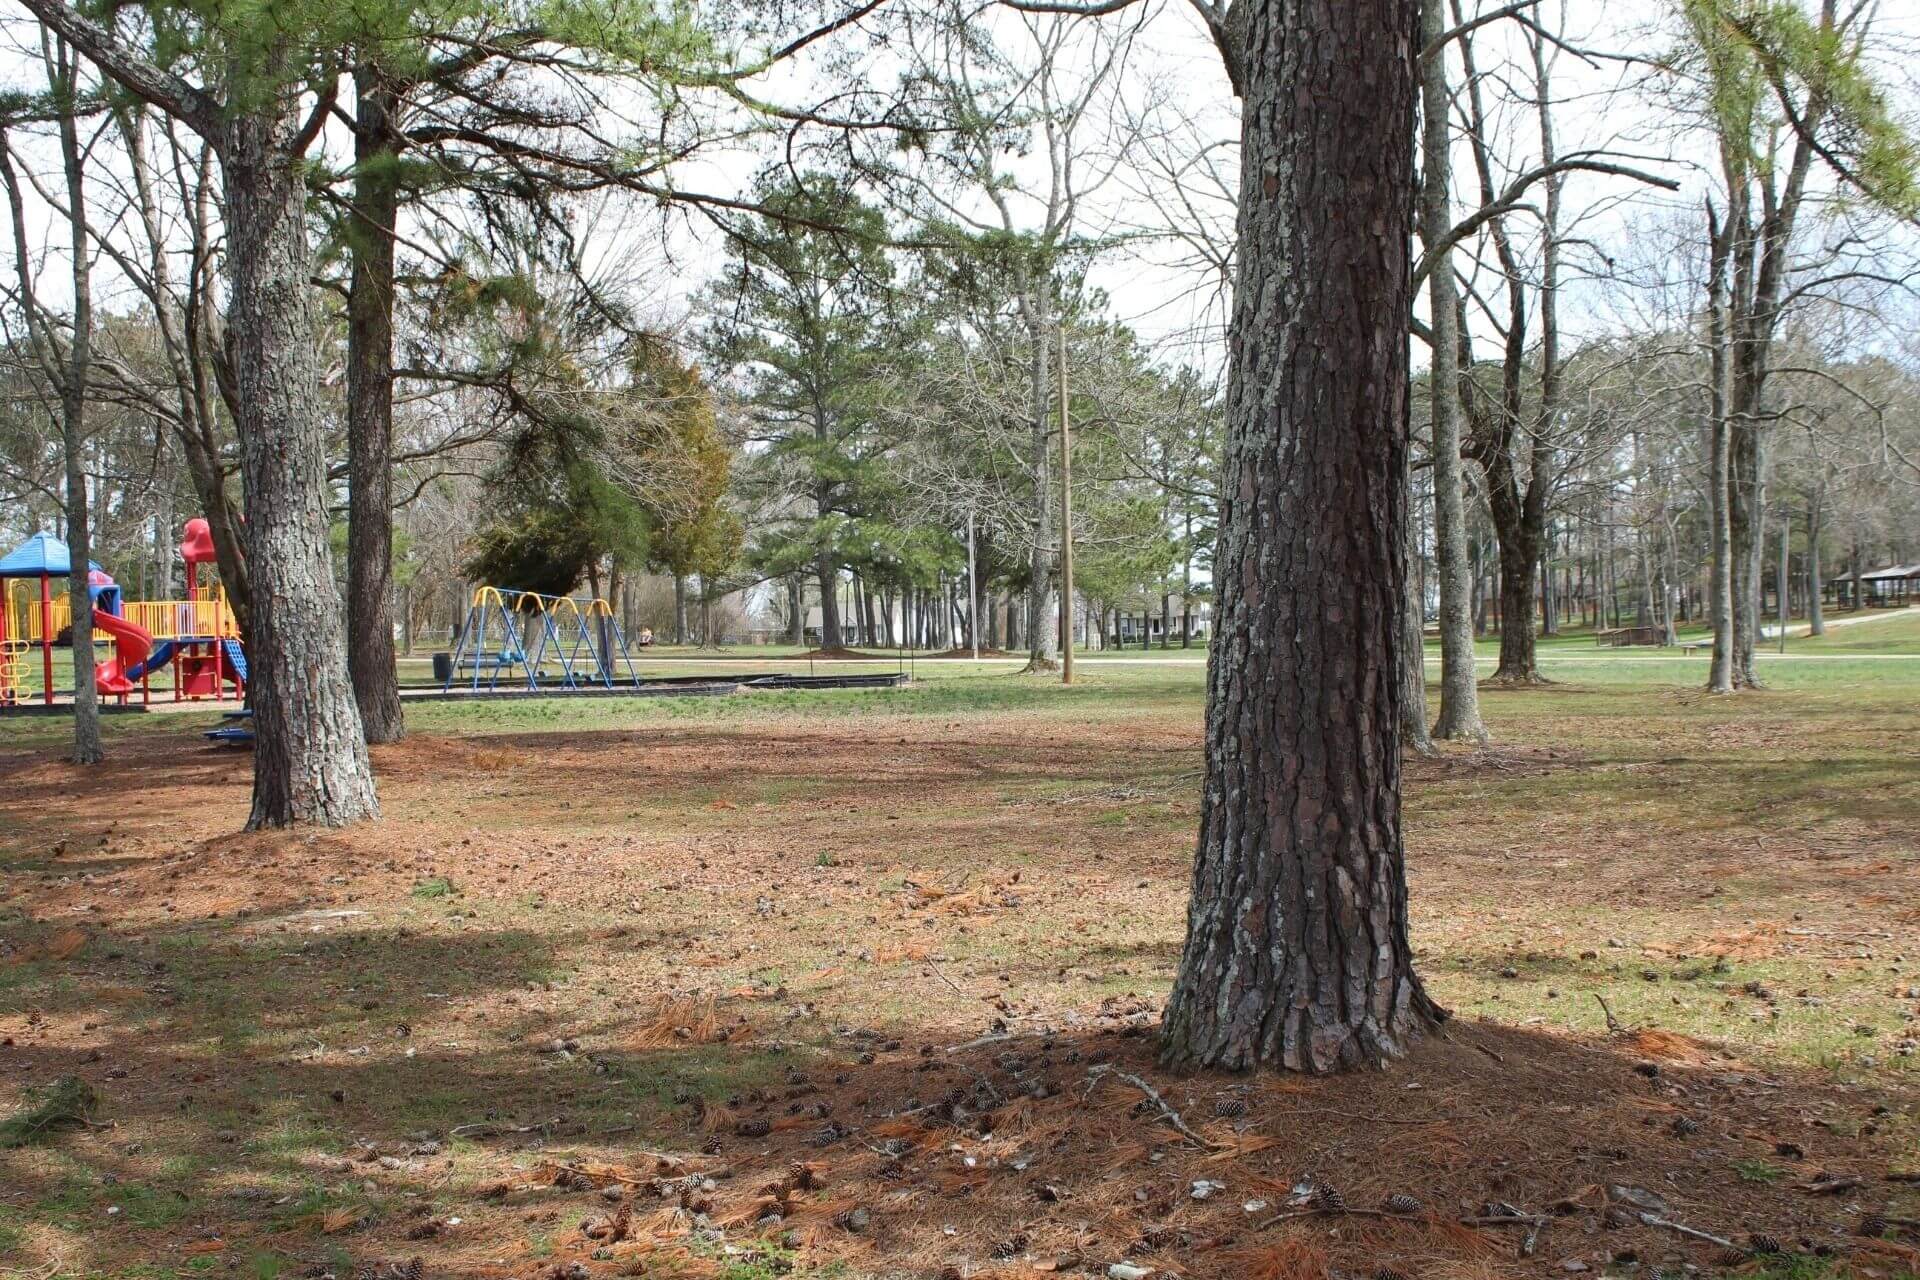 A park with trees and leaves on the ground.